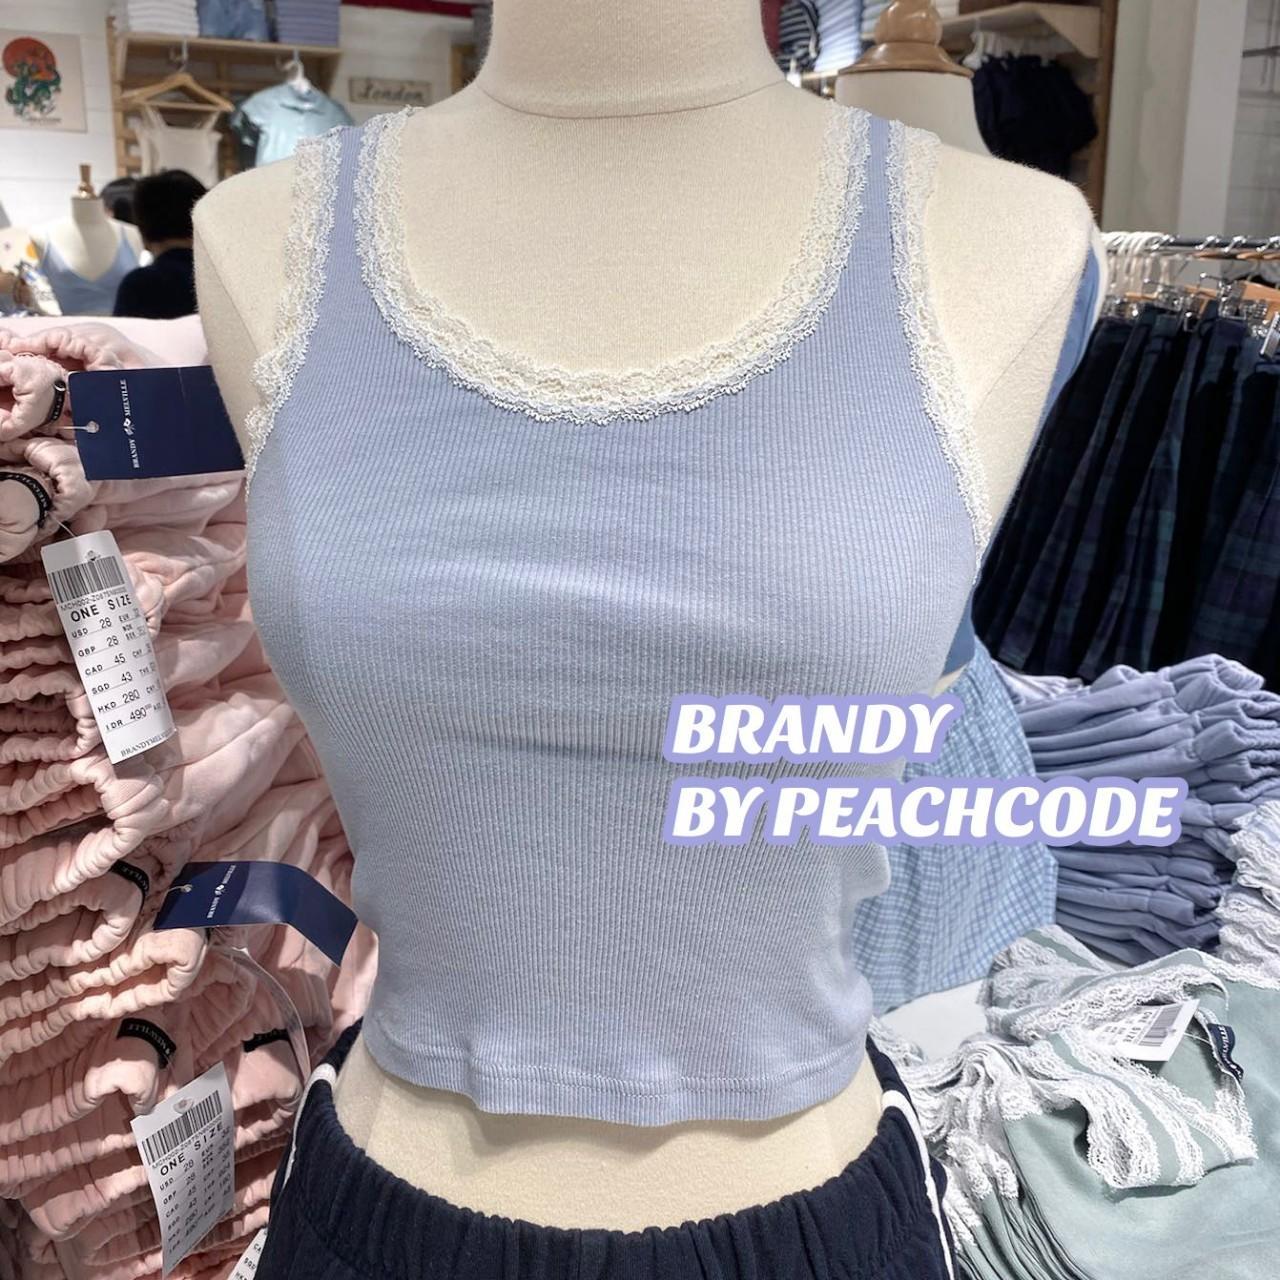 BNWT brandy melville beyonca lace tank top in blue and beige